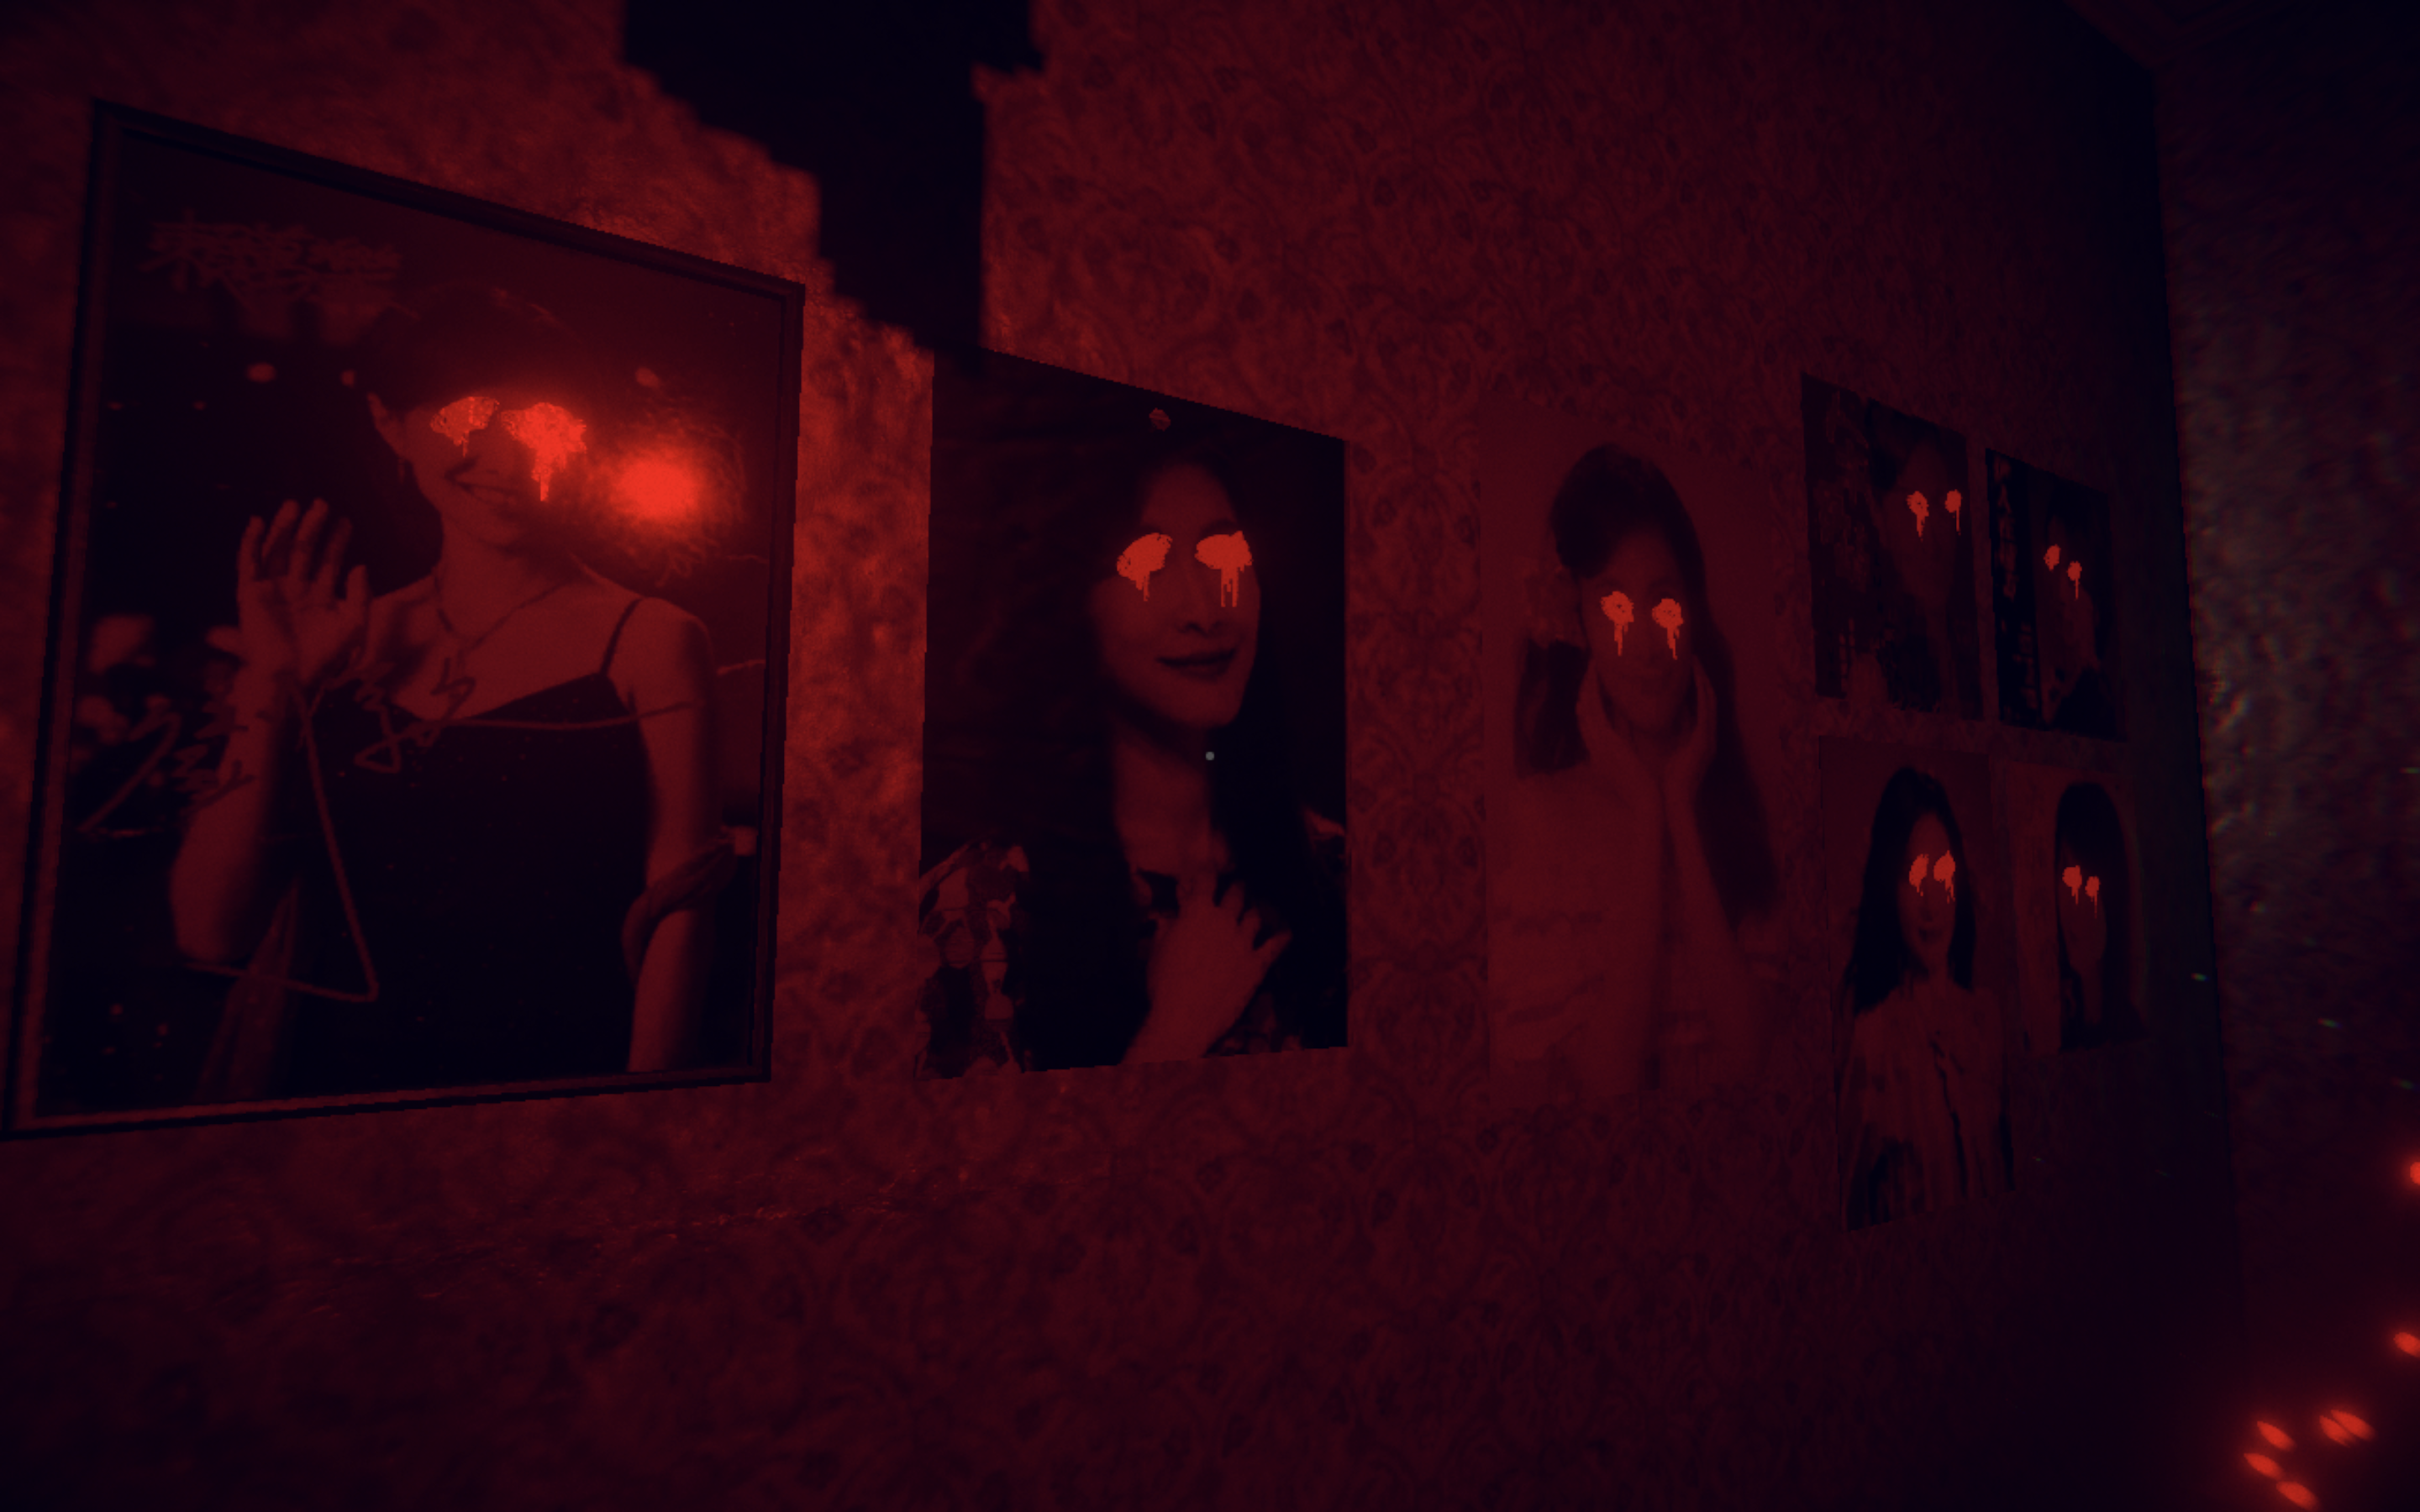 A family shrine with a red filter over it from Devotion. The eyes are glowing red